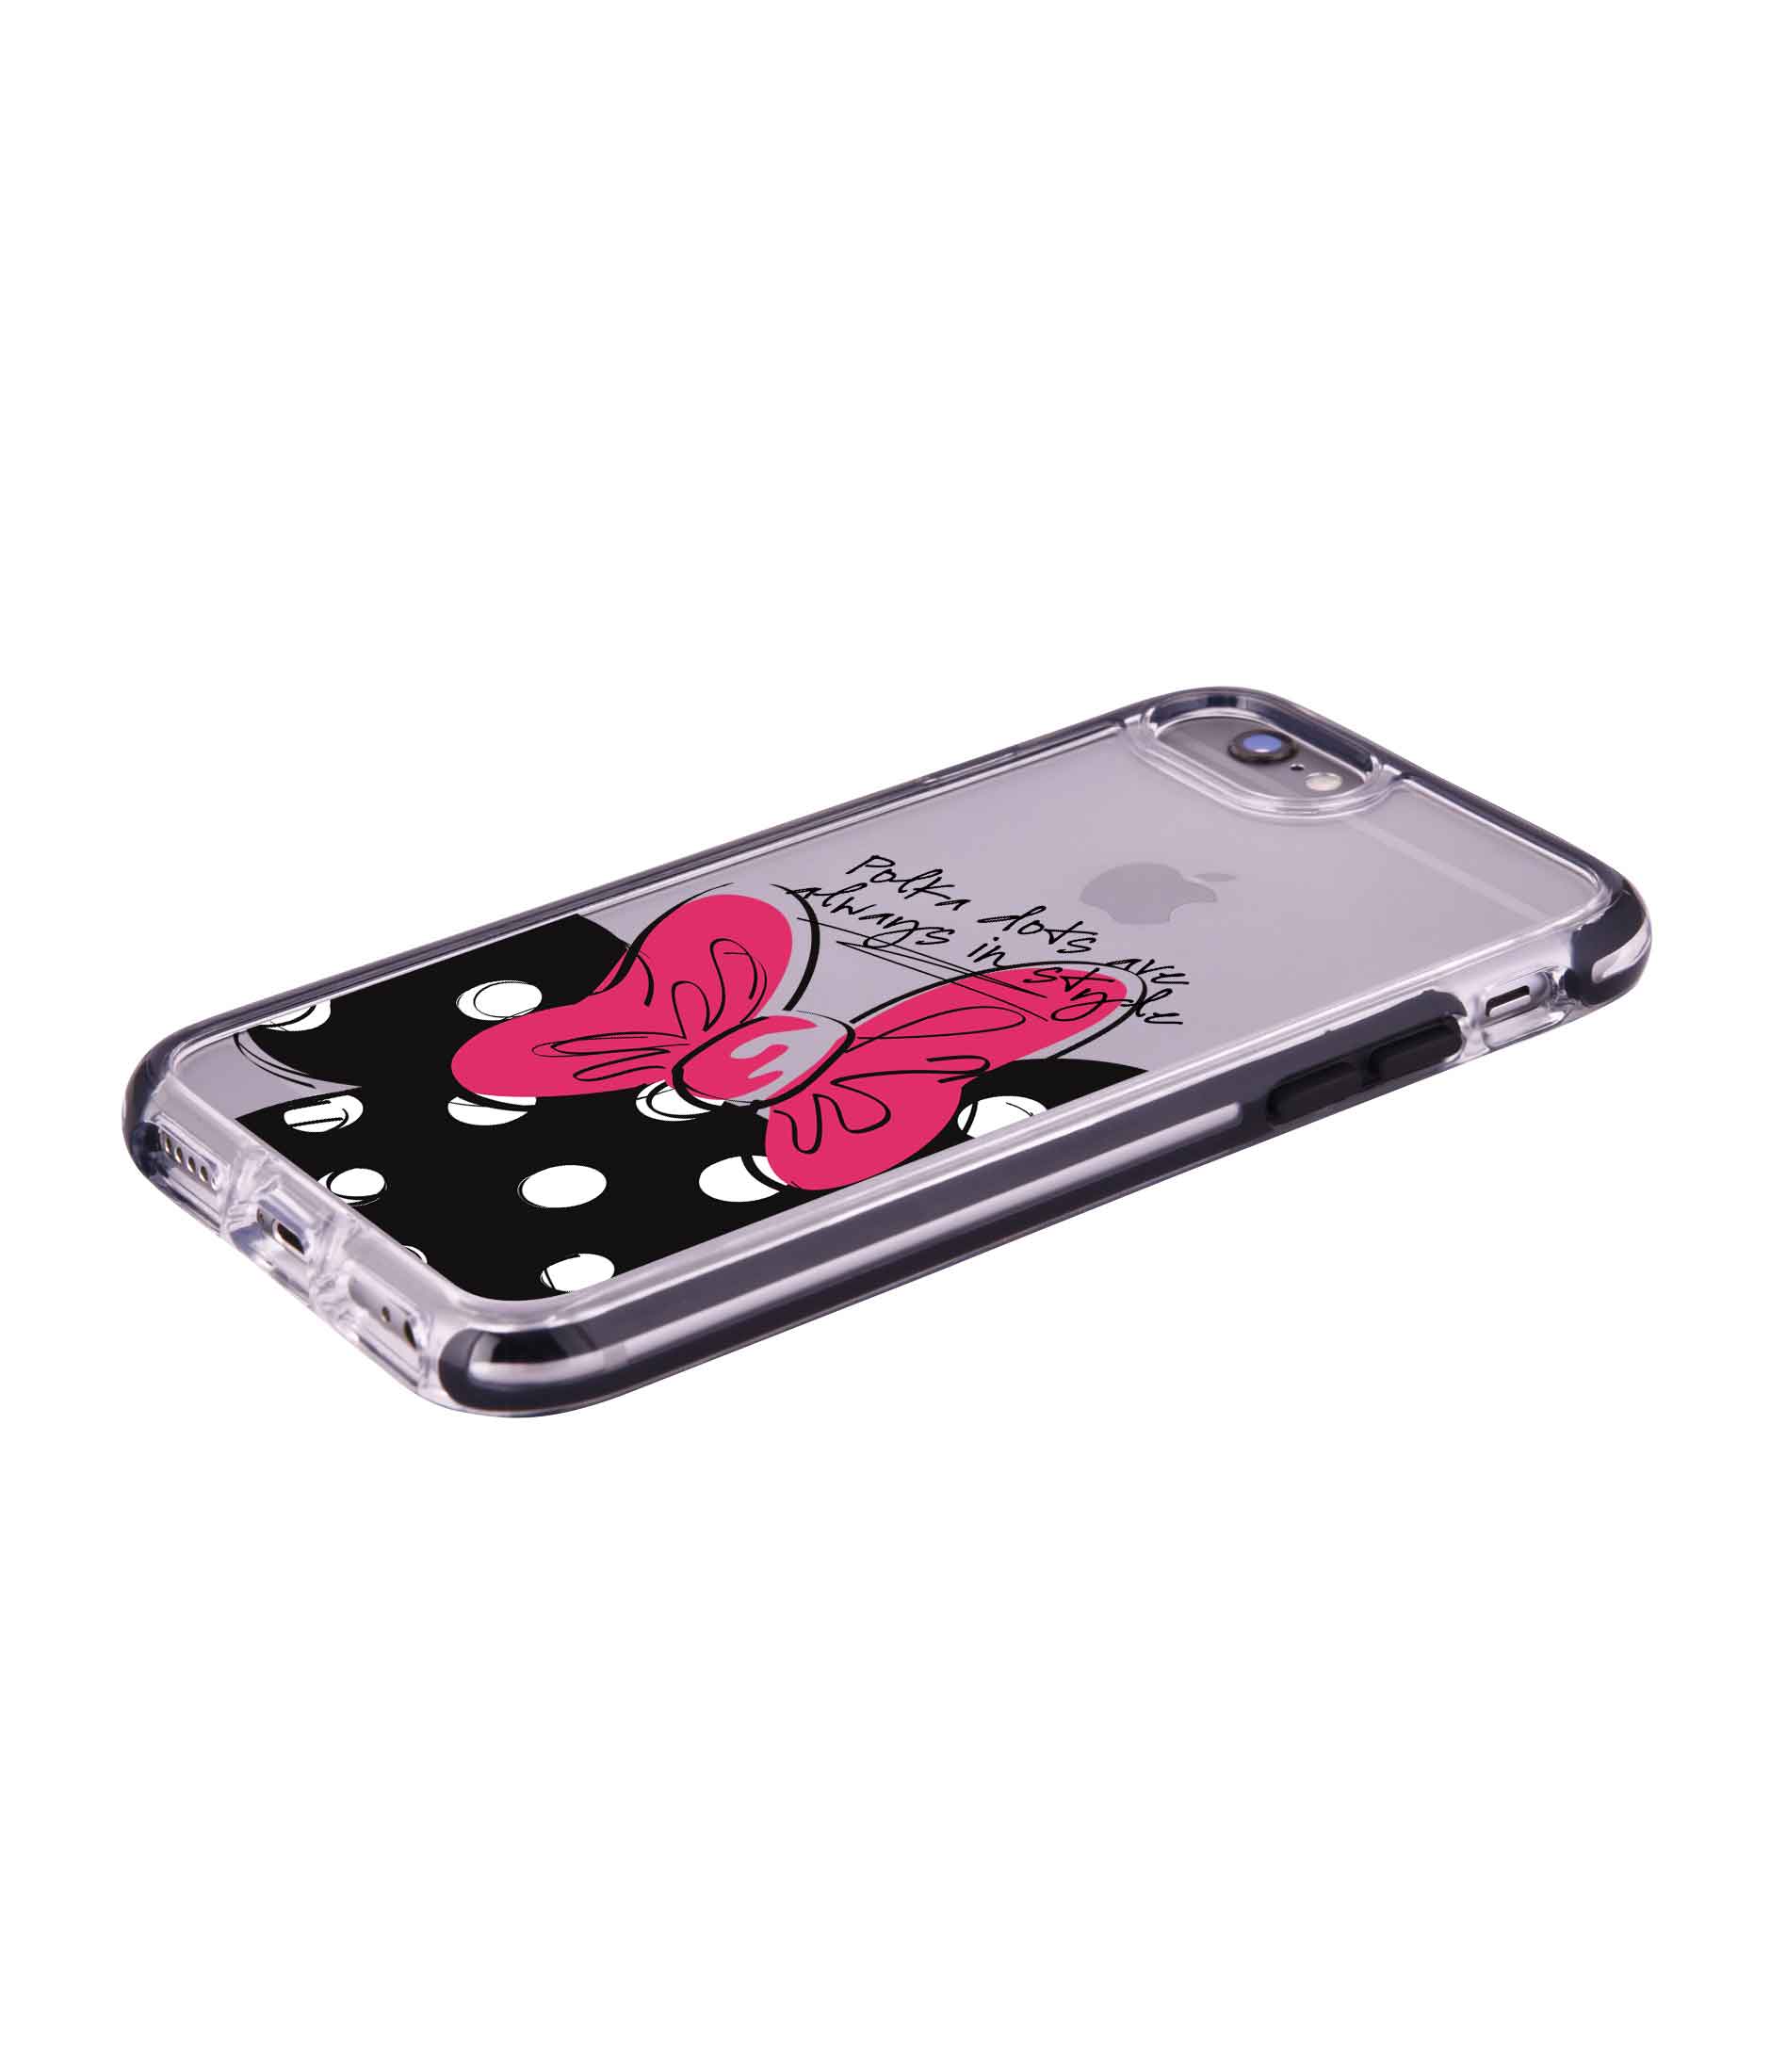 Polka Minnie - Extreme Phone Case for iPhone 6